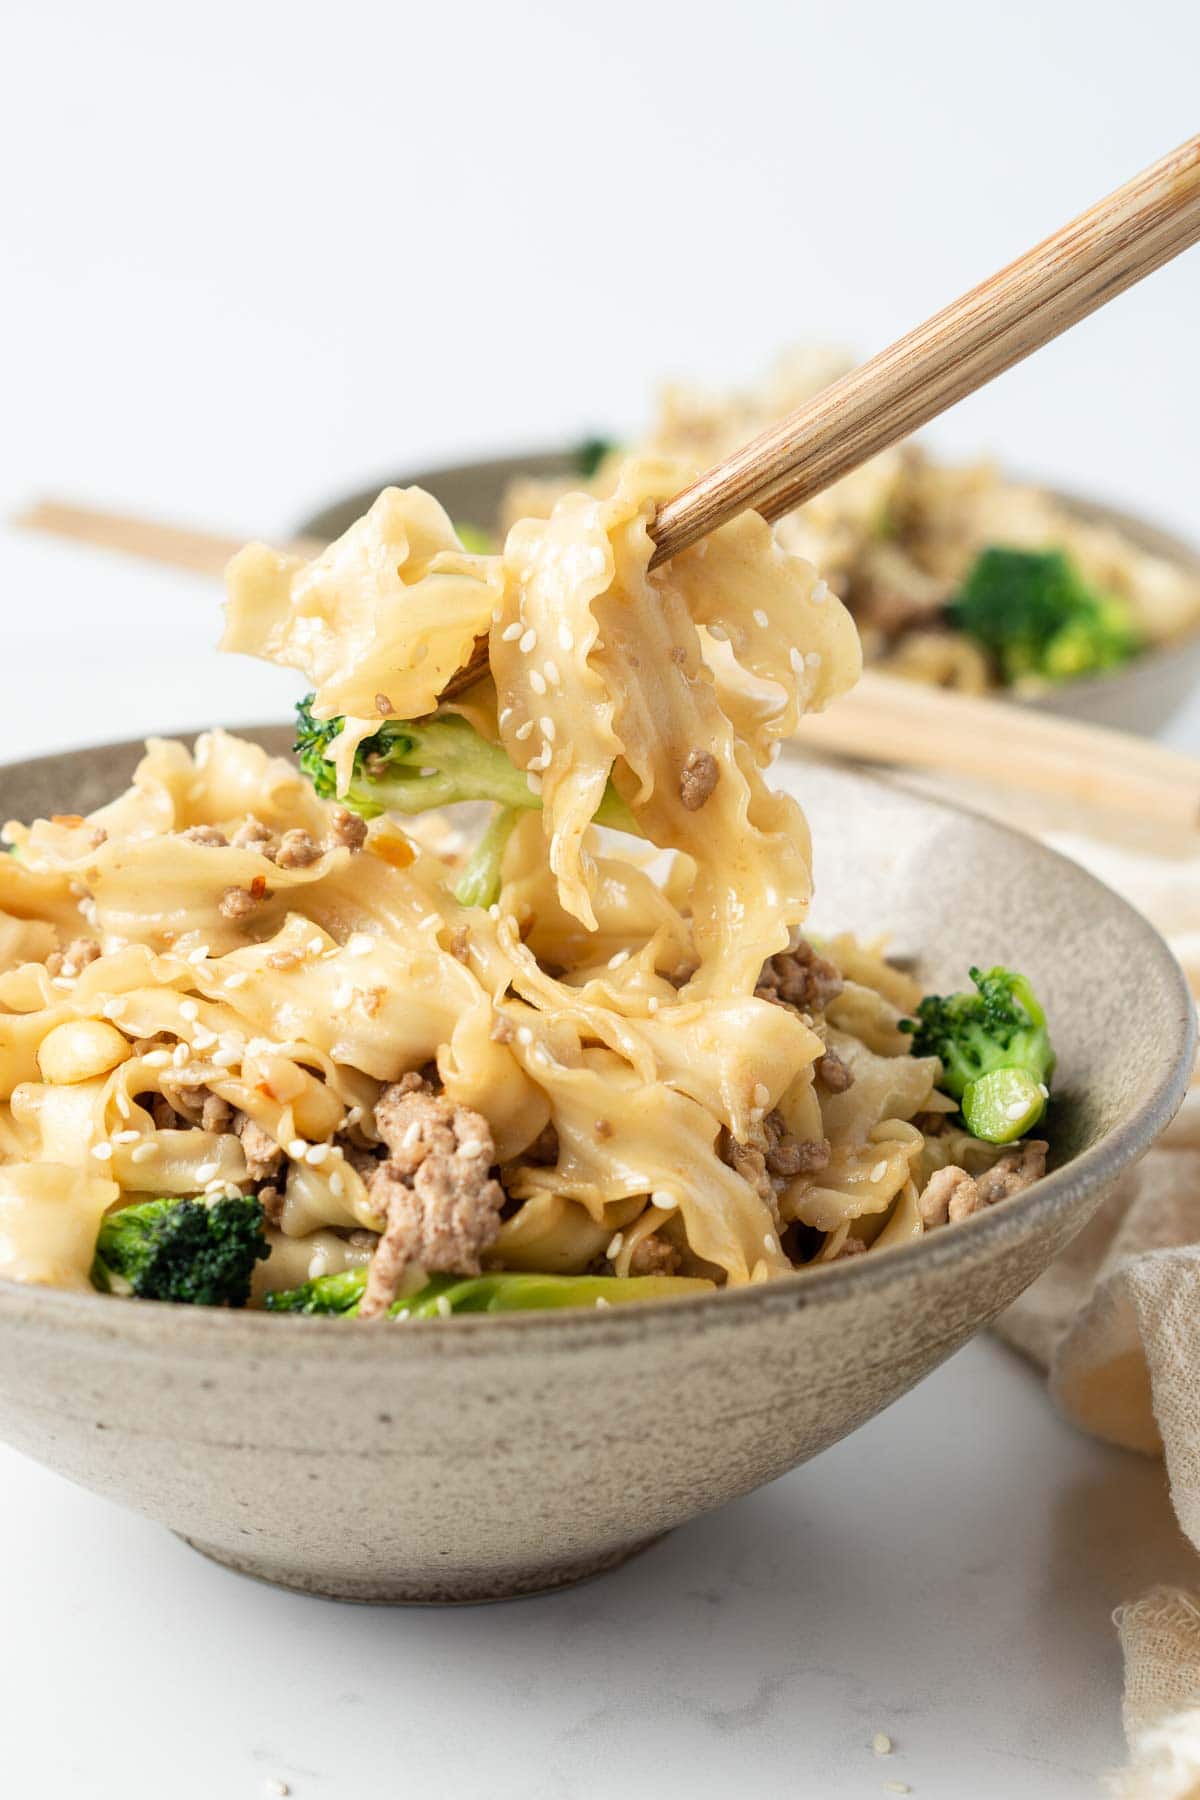 Peanut Noodles with Chicken - Budget Bytes